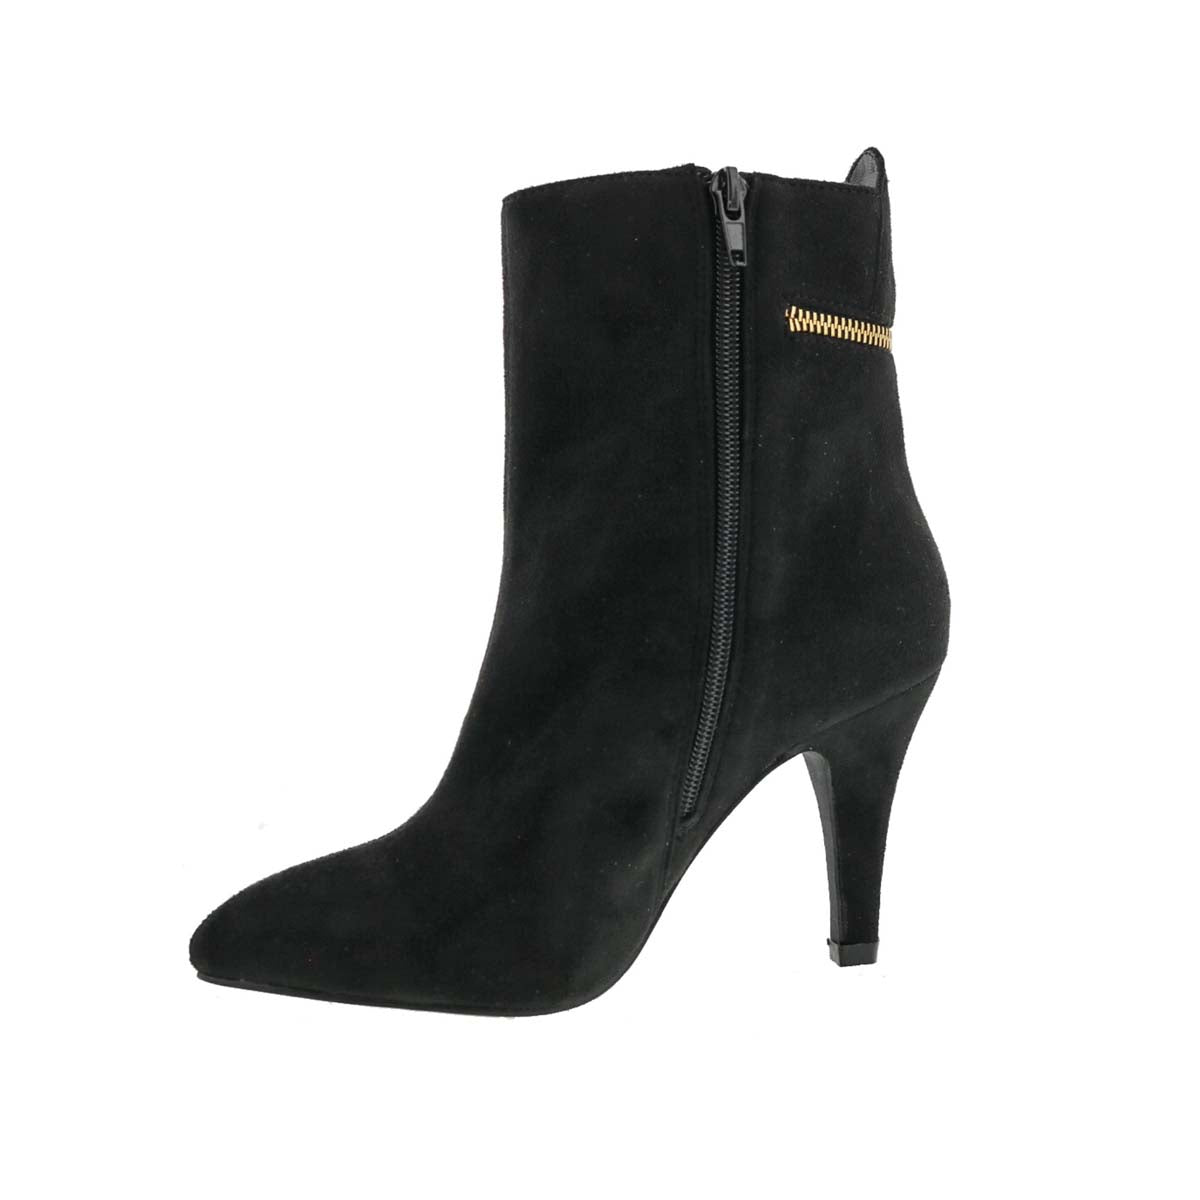 BELLINI CLAUDIA WOMEN BOOTS IN BLACK MICROSUEDE - TLW Shoes